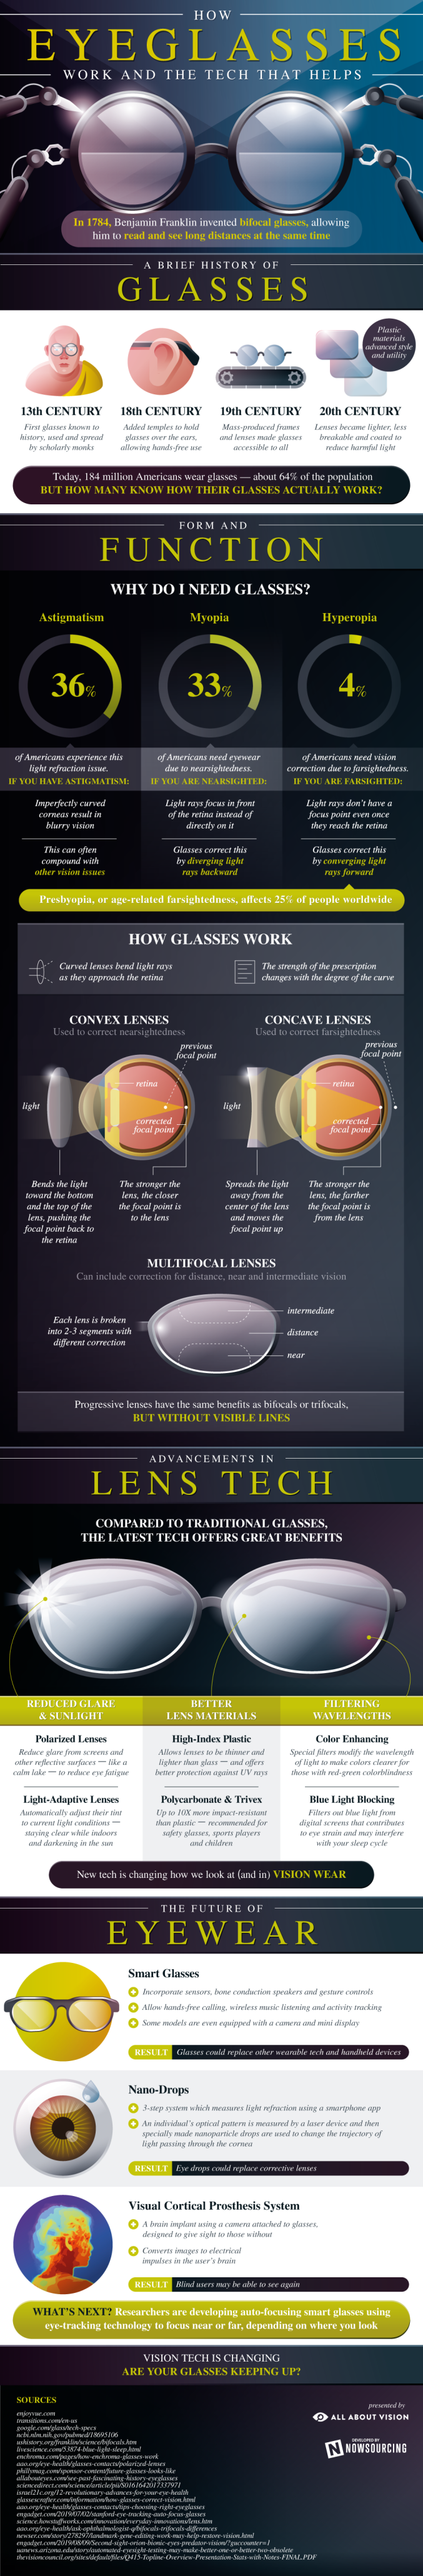 How Eyeglasses Work And The Tech That Helps #infographic